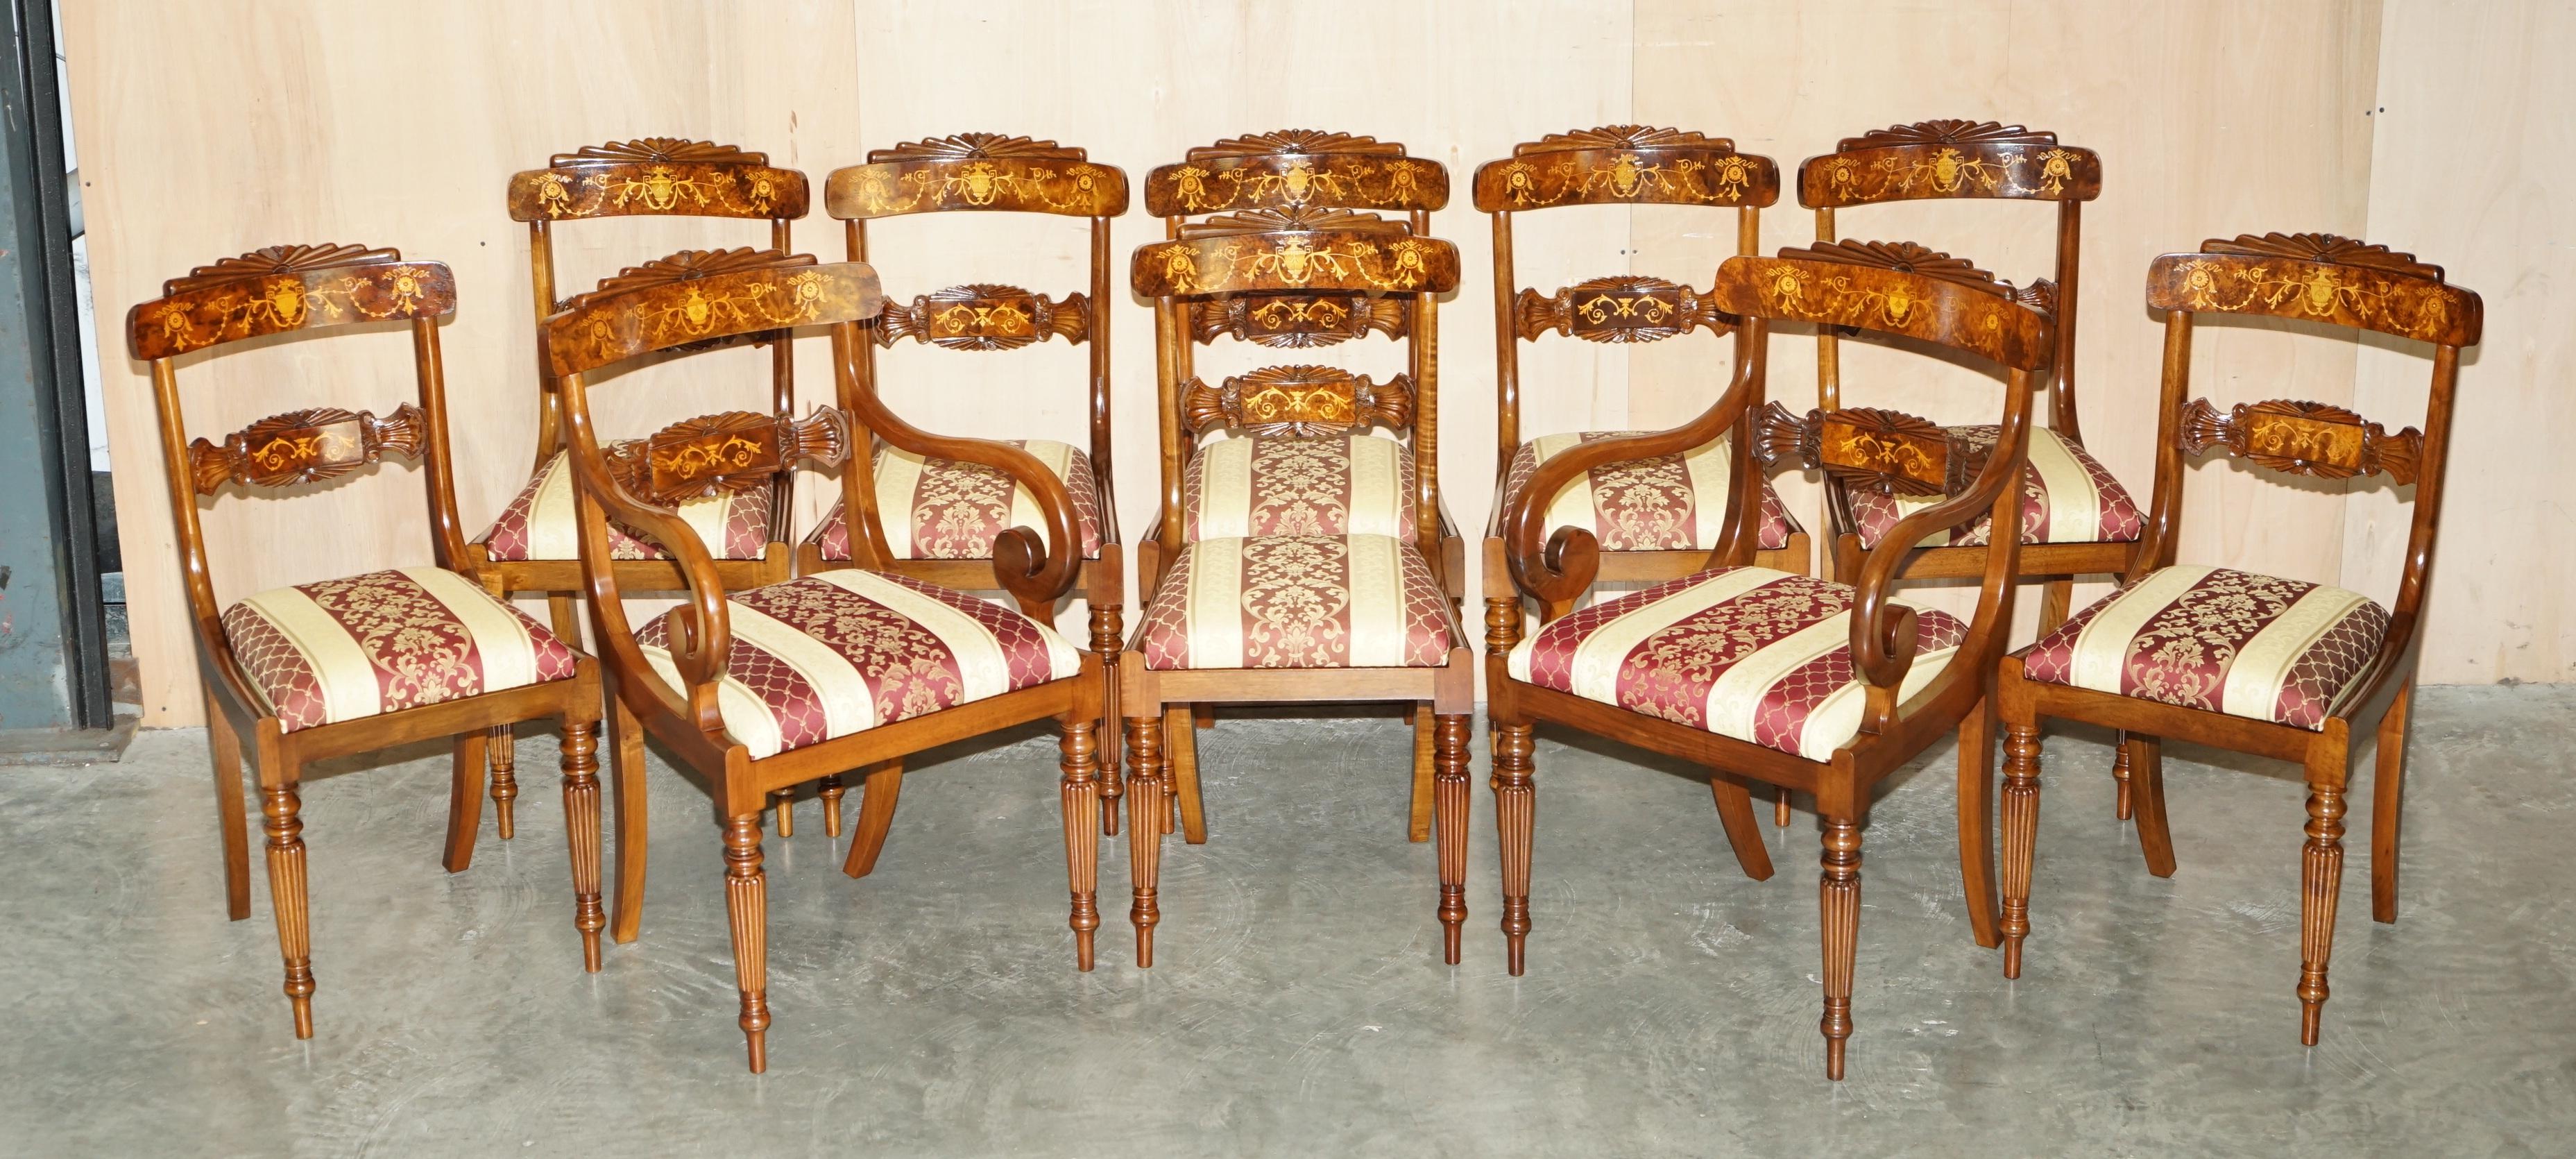 Royal House Antiques

Royal House Antiques is delighted to offer for sale this absolutely exquisite Regency style Burr Walnut two pedestal dining table with ten matching inlaid dining chairs that have ornately carved frames 

Please note the